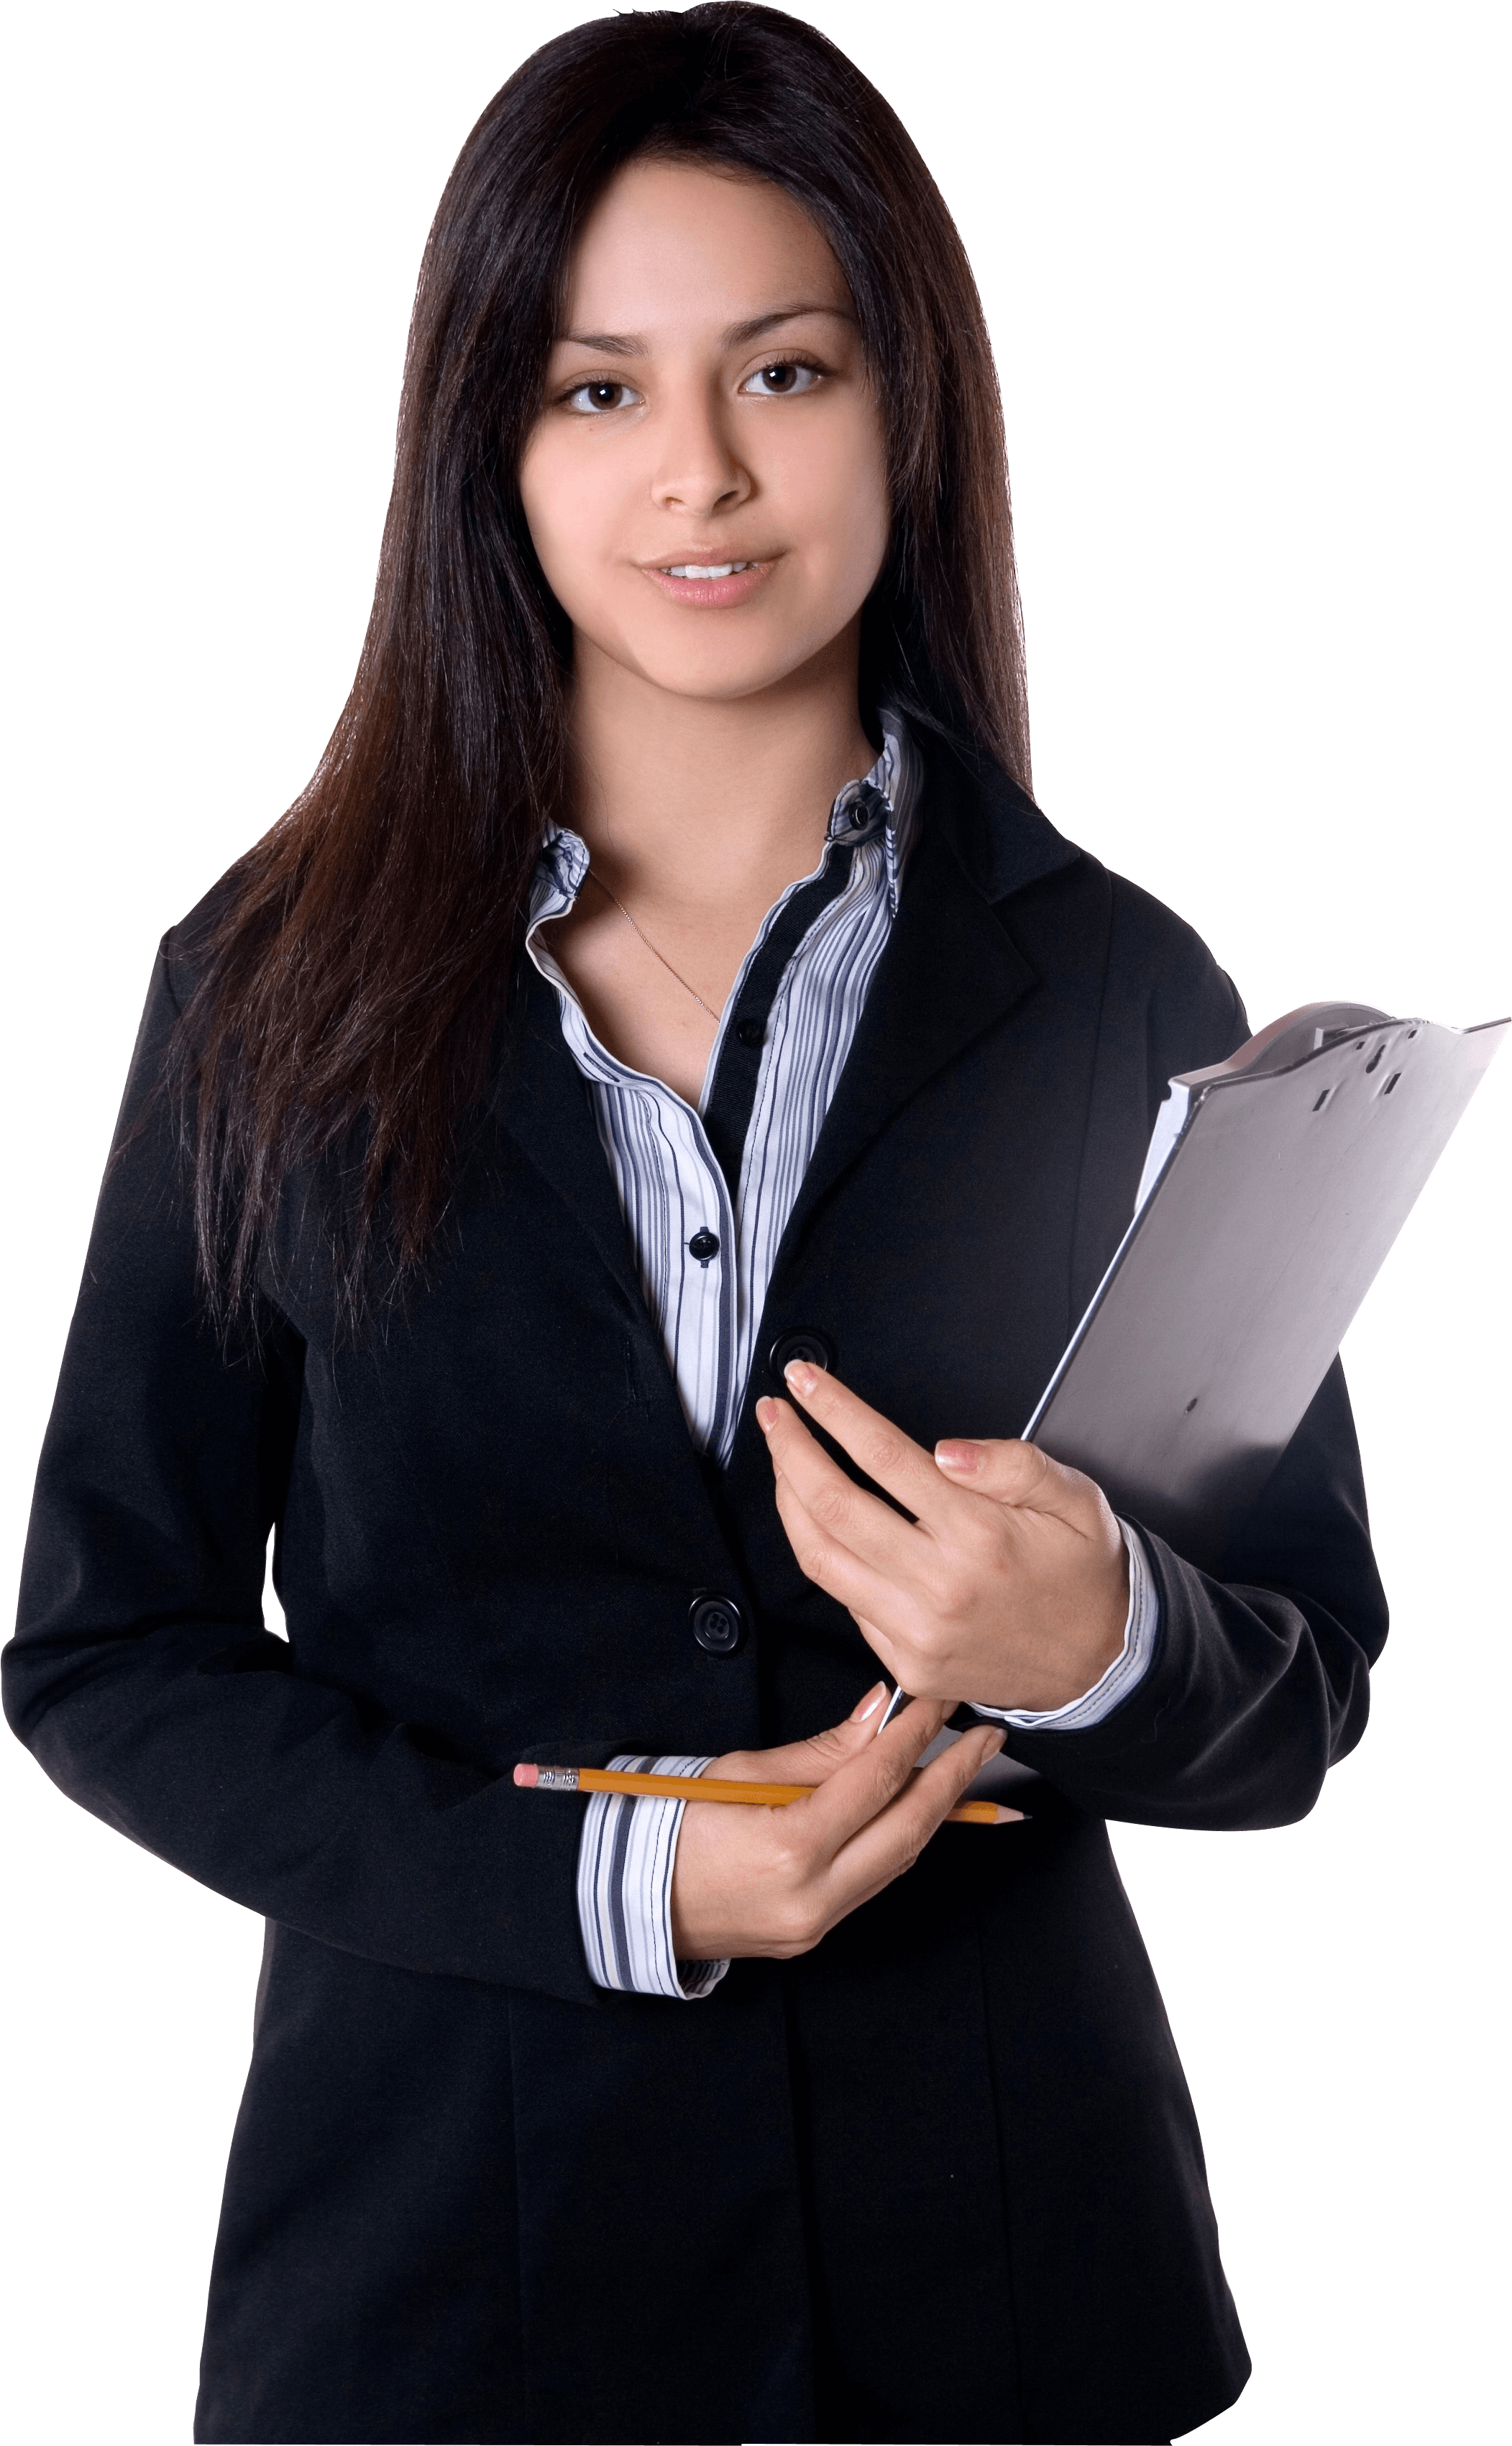 Download Business Woman Girl Png Image HQ PNG Image